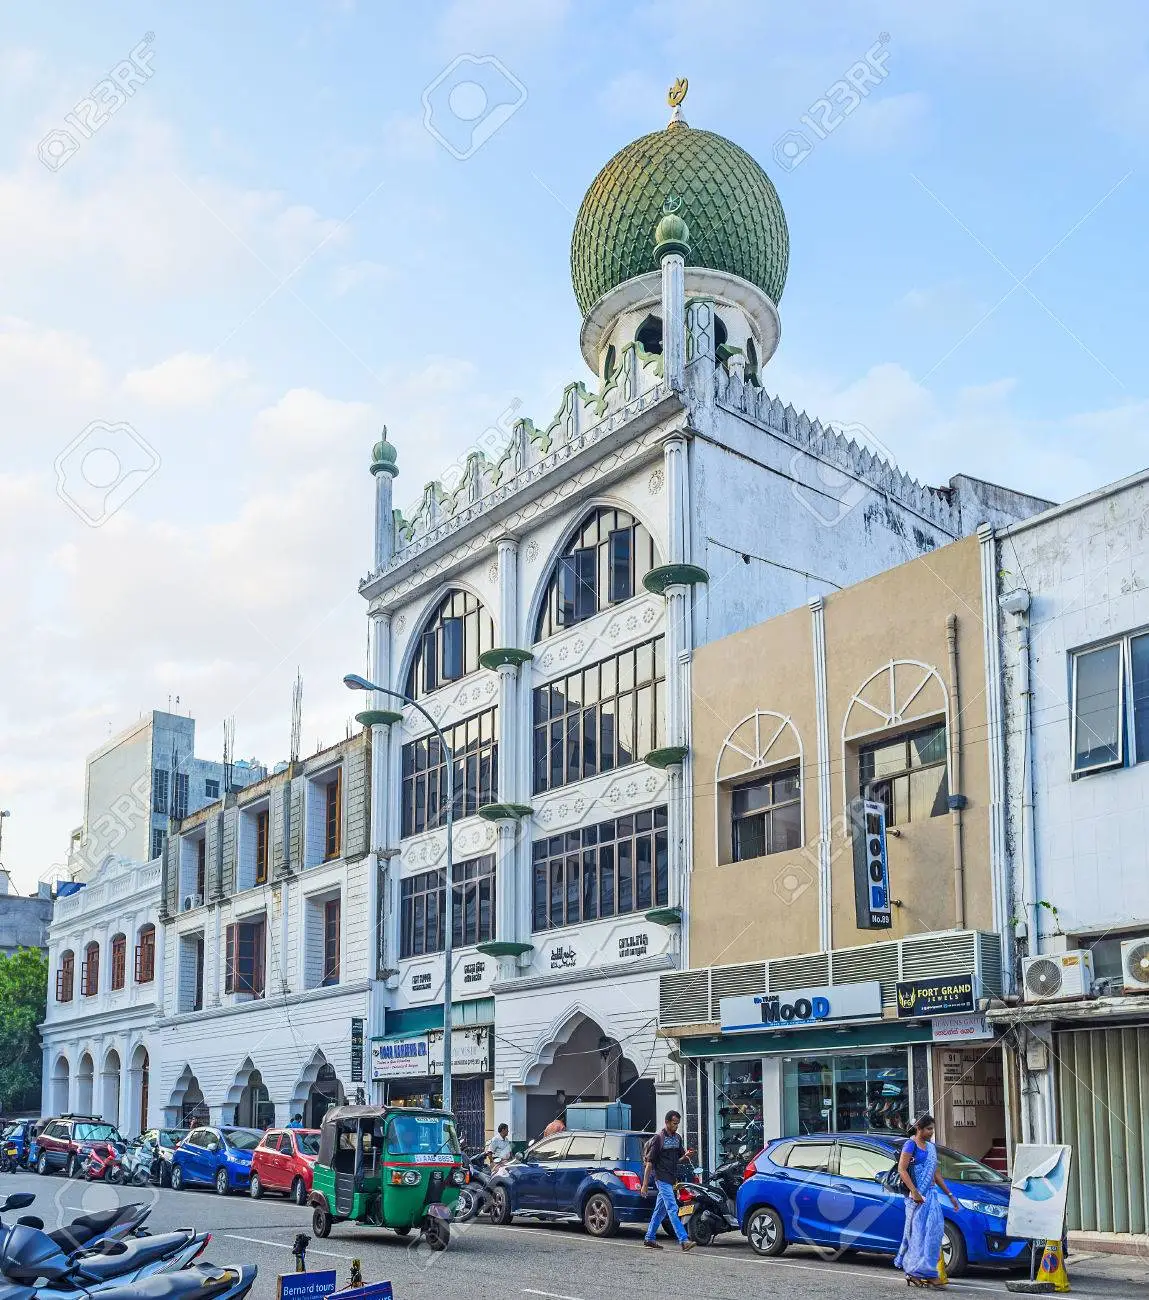 73237168-colombo-sri-lanka-december-6-2016-the-facade-of-jumma-mosque-of-fort-located-in-the-chatham-street-a - Copy - Copy